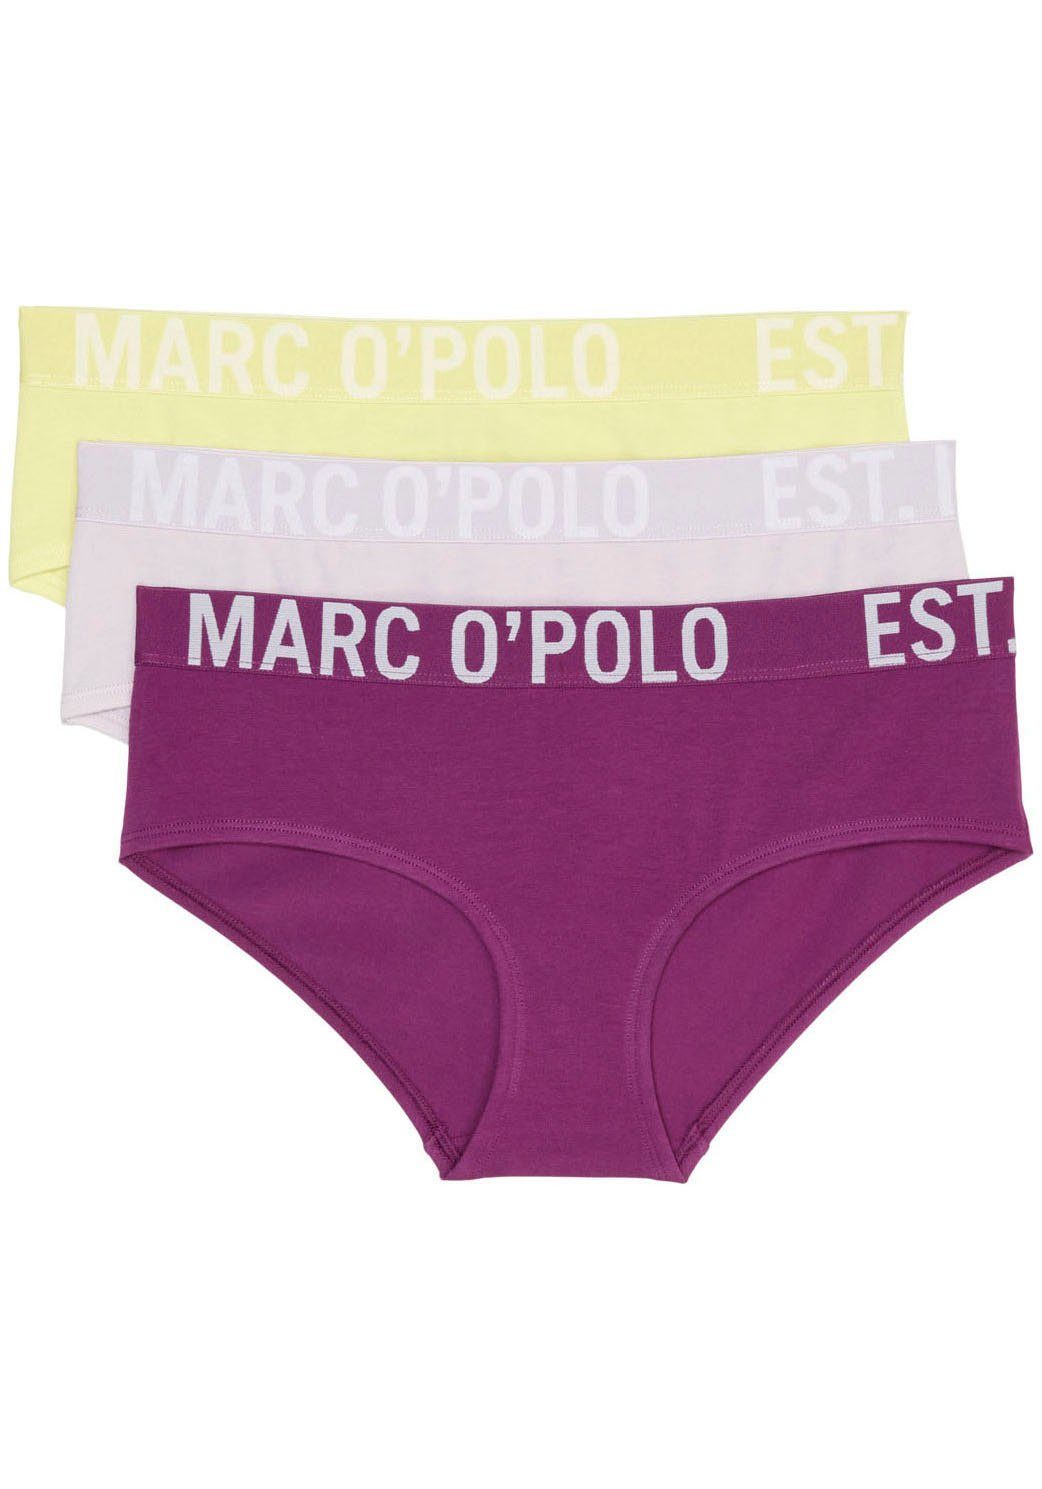 O'Polo Marc (Packung, 539berry/lim Slip 3-St)